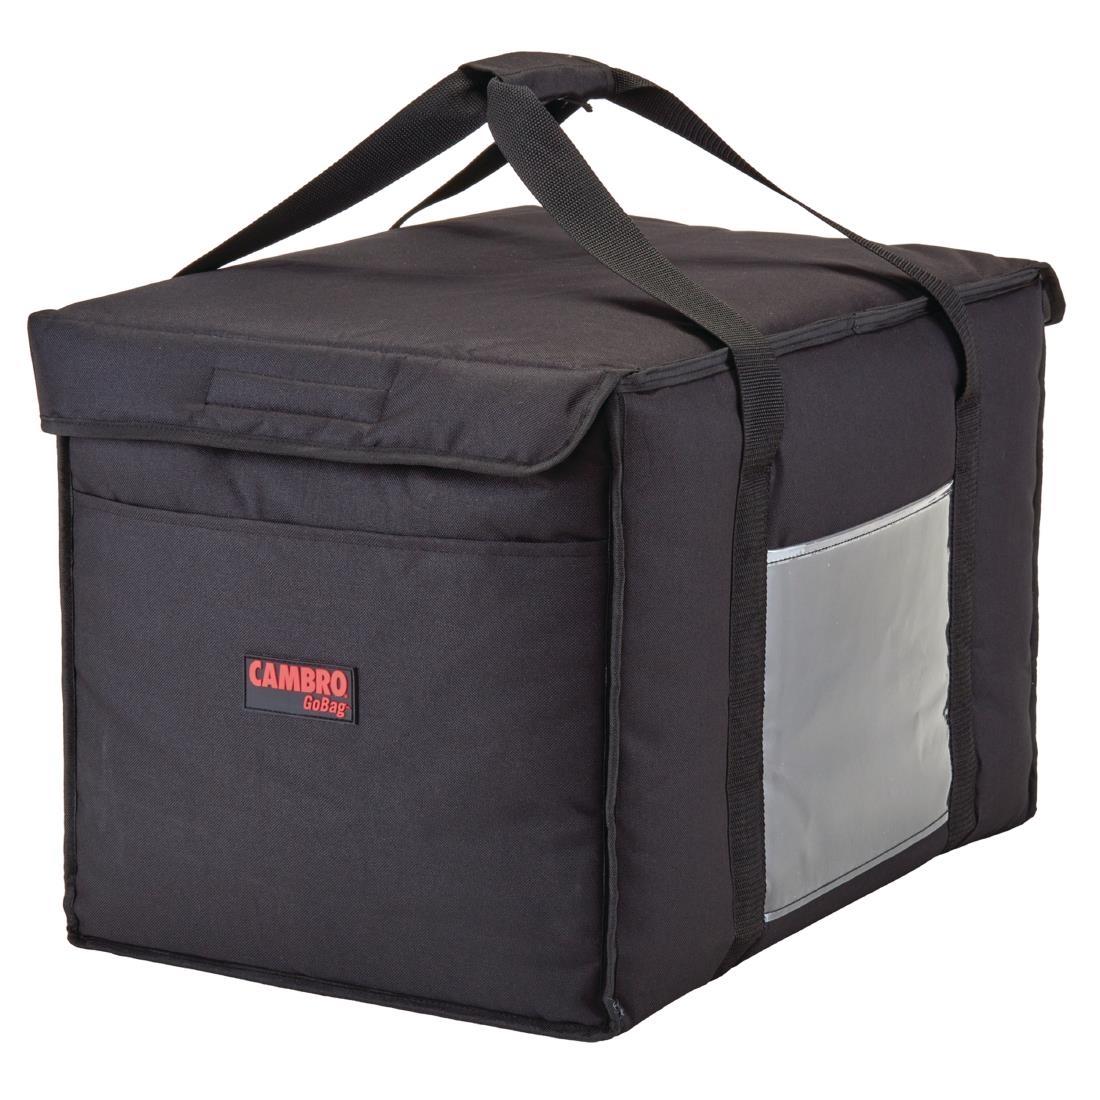 Cambro Top Loading GoBag Delivery Bag Large - FB274  - 1